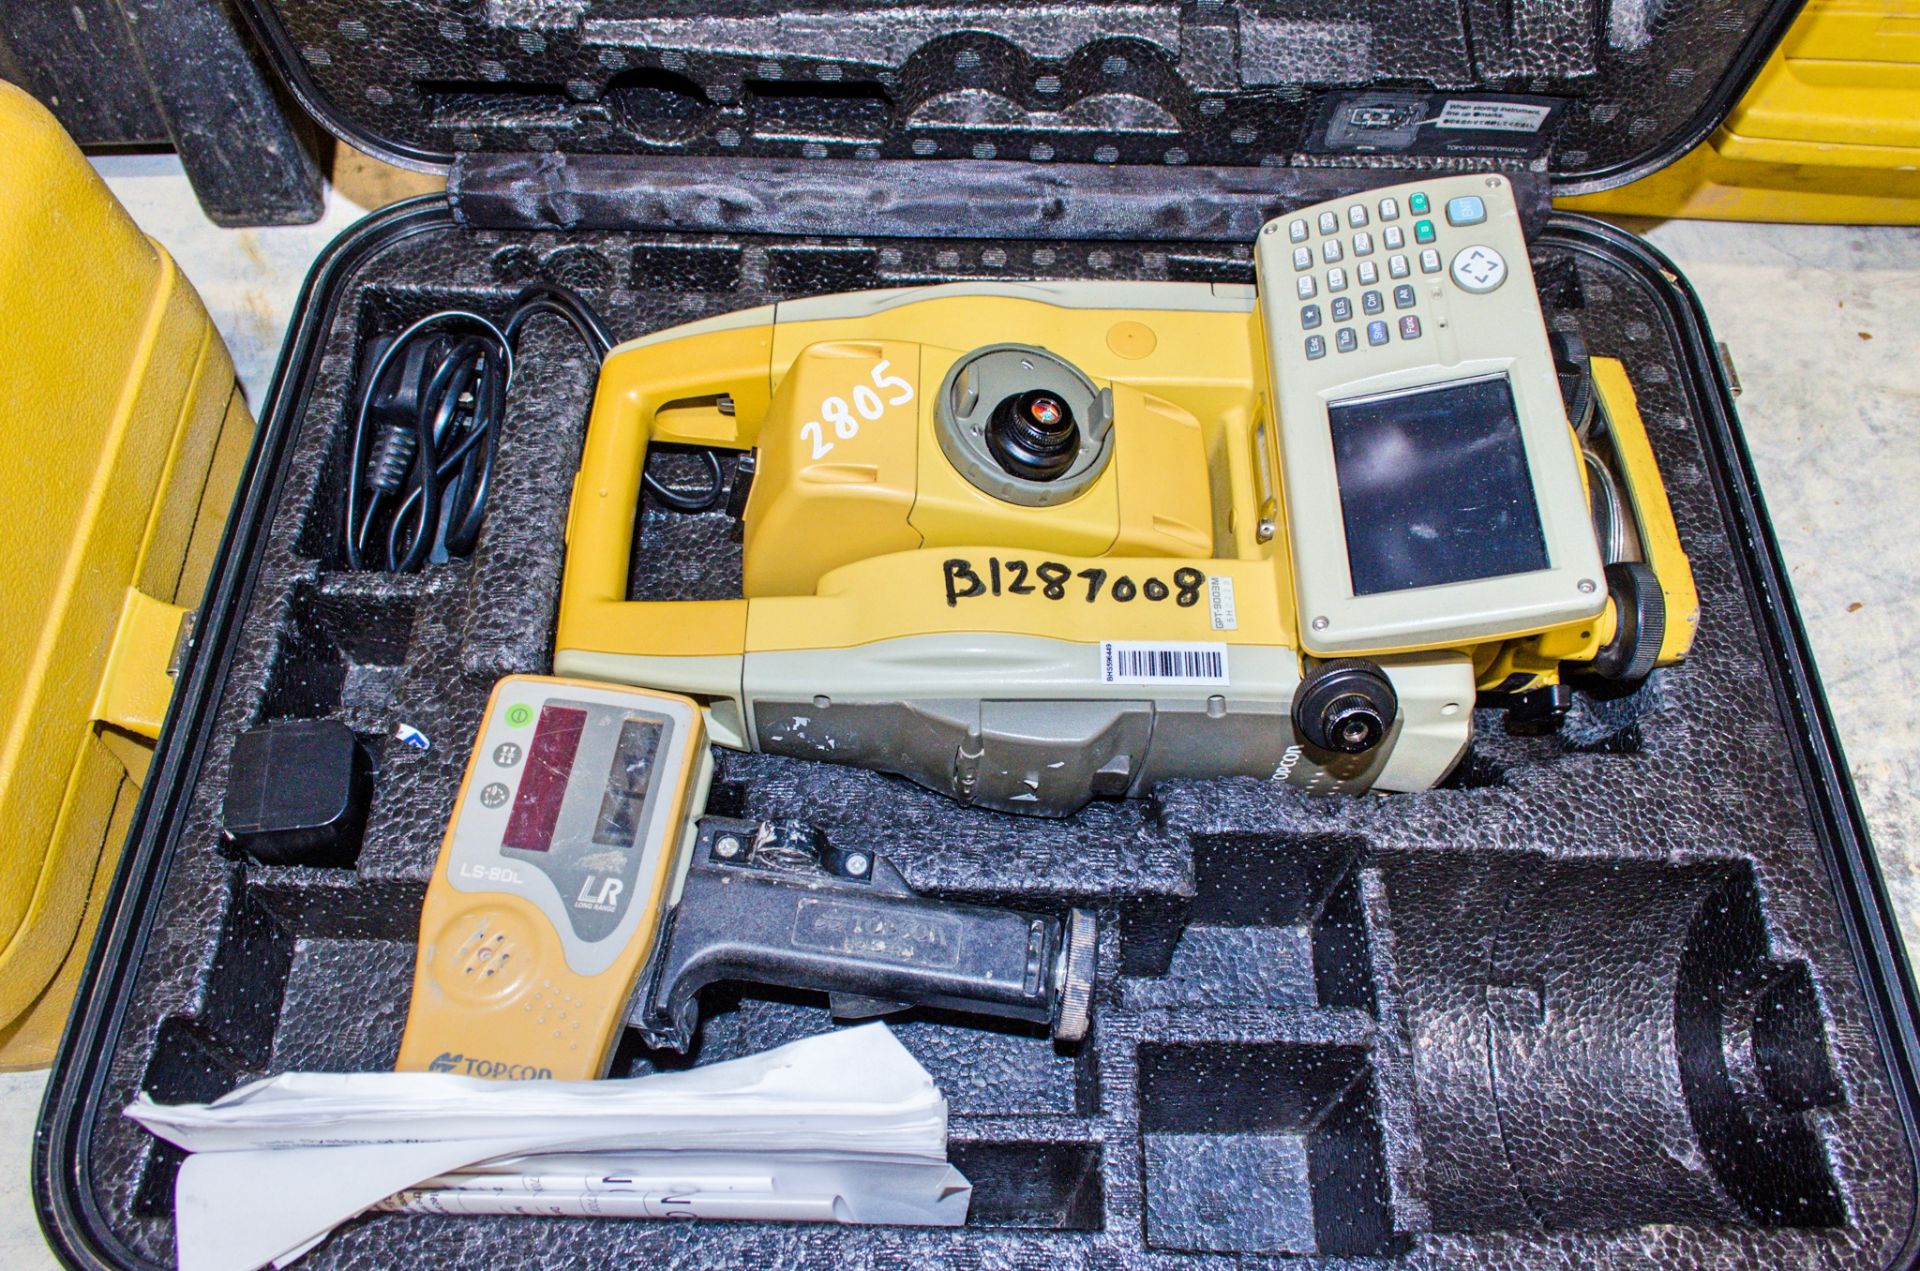 Topcon GPT 9003M total station c/w charger, battery